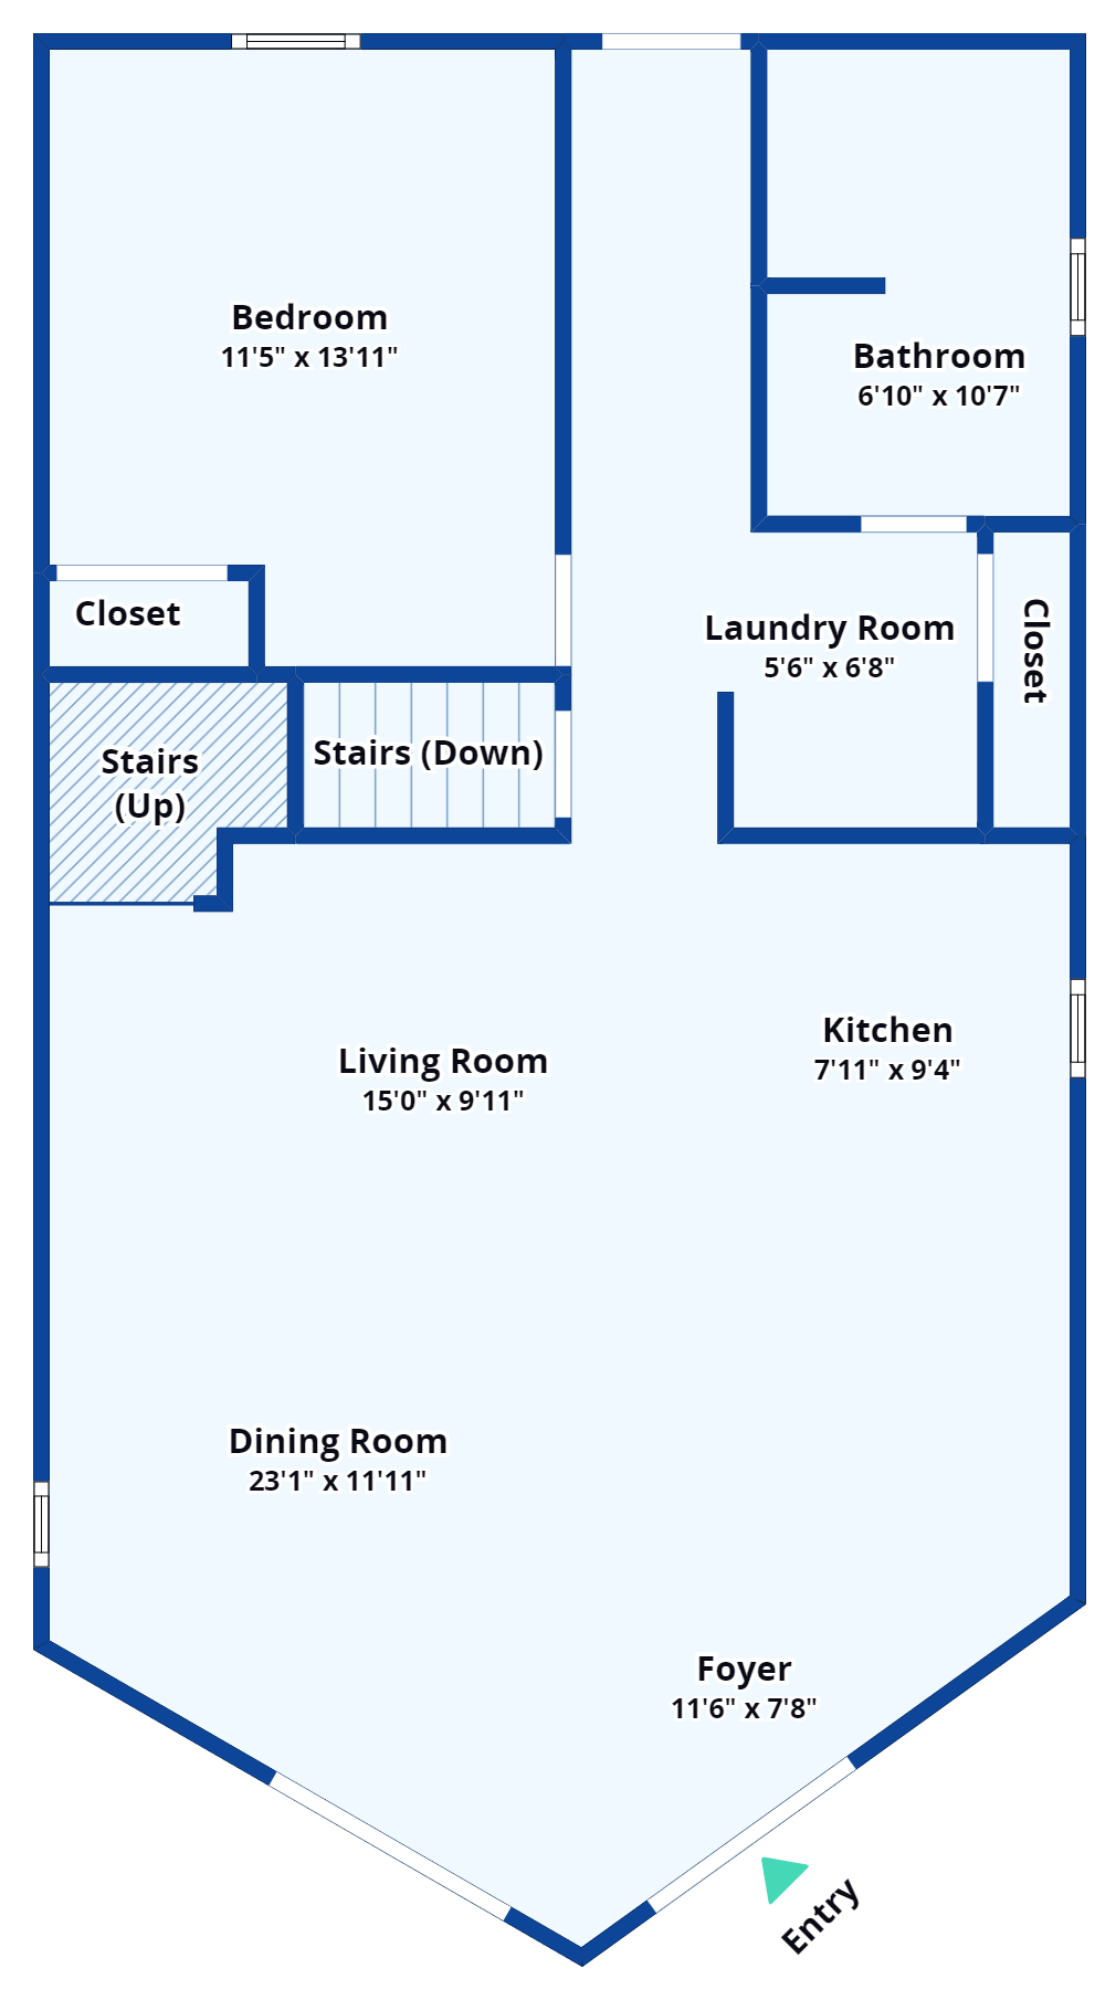 Floor plan preview, click to explore more